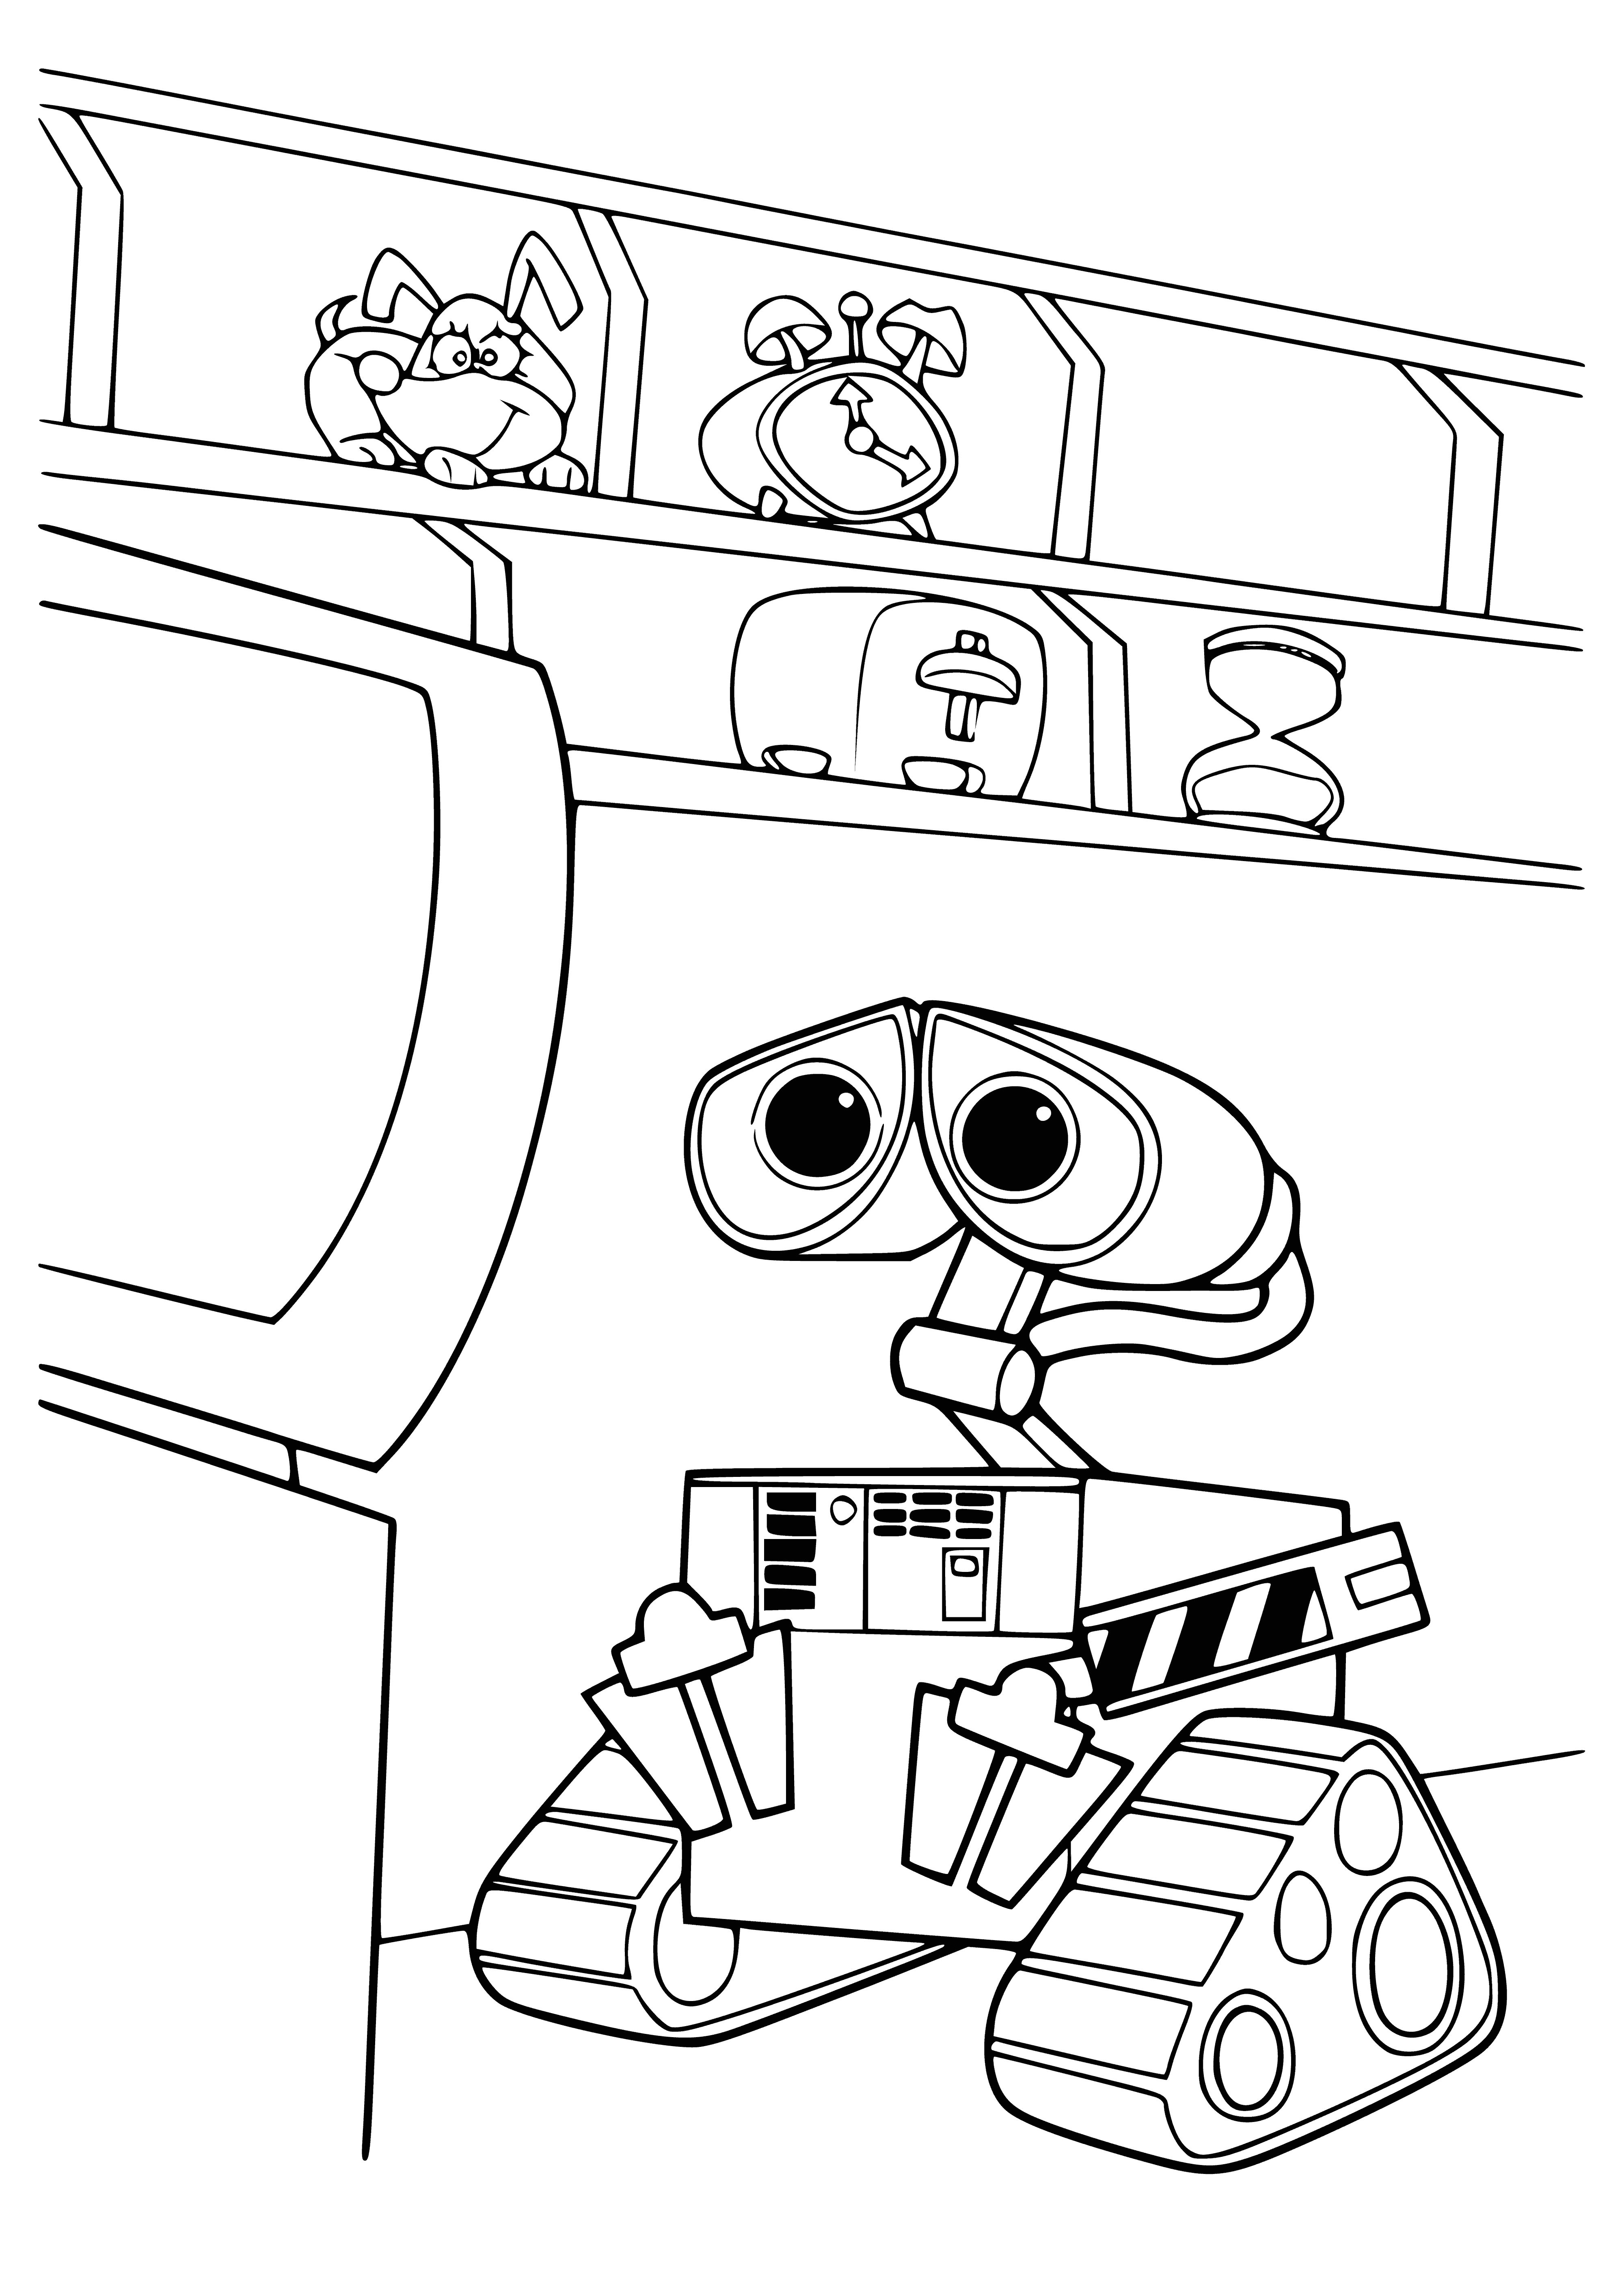 coloring page: Robot stands in center of coloring page, TV showing rotating planet, waving hand & holding remote. Next to robot is green plant in pot.